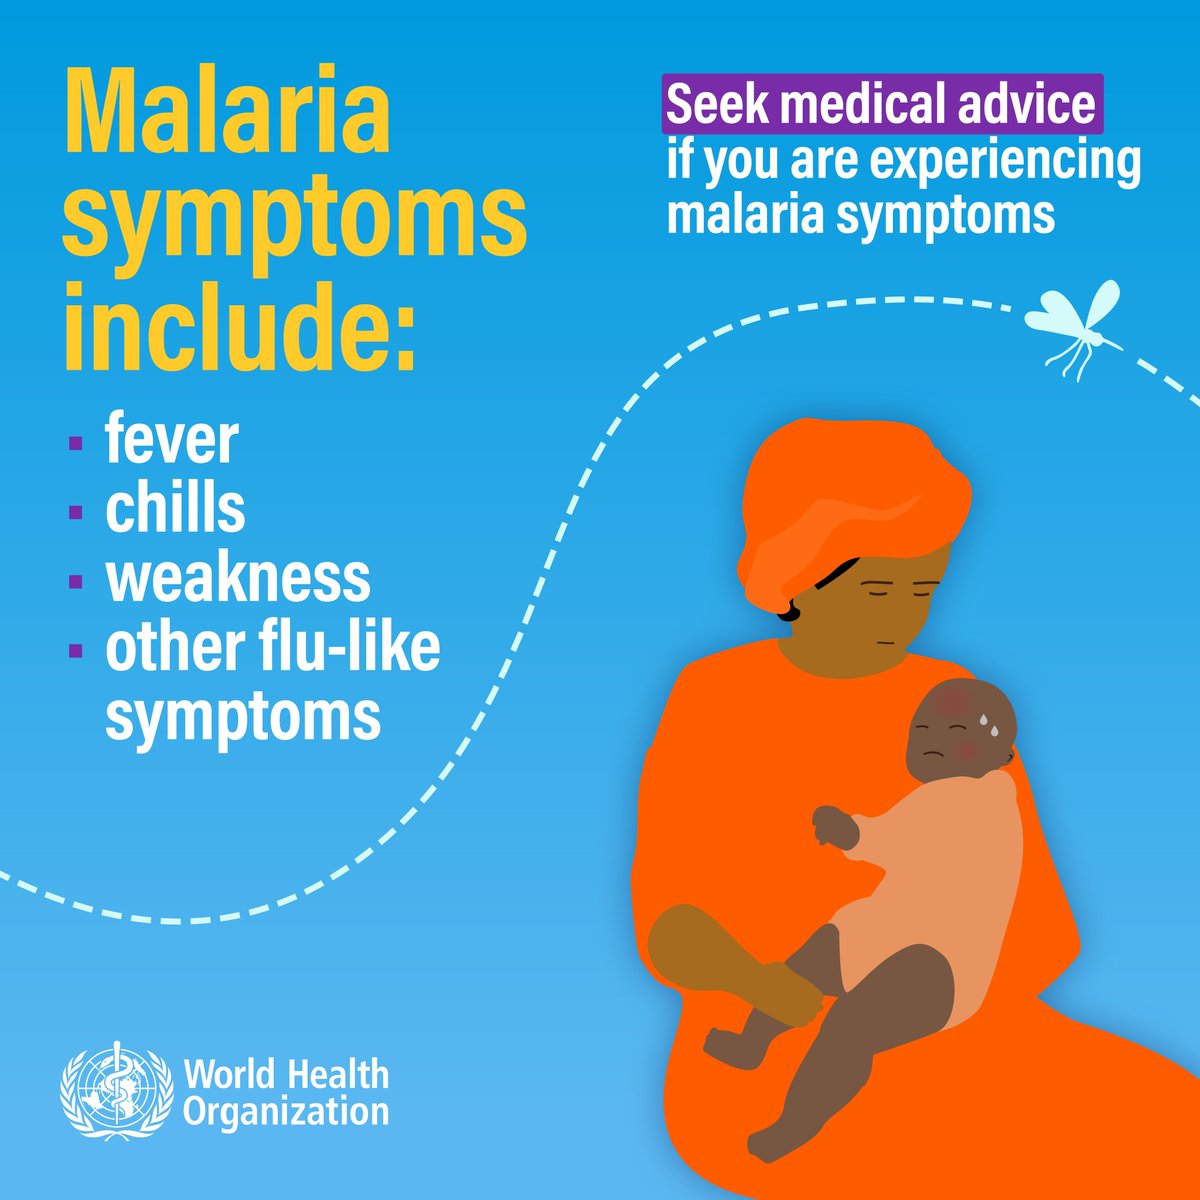 #Malaria is transmitted through the bites of Anopheles mosquitoes, and the African region bears the highest burden. The most common symptoms include: 🌡️ Fever 🥶 Chills 😓 Weakness 🤒 Other flu-like symptoms